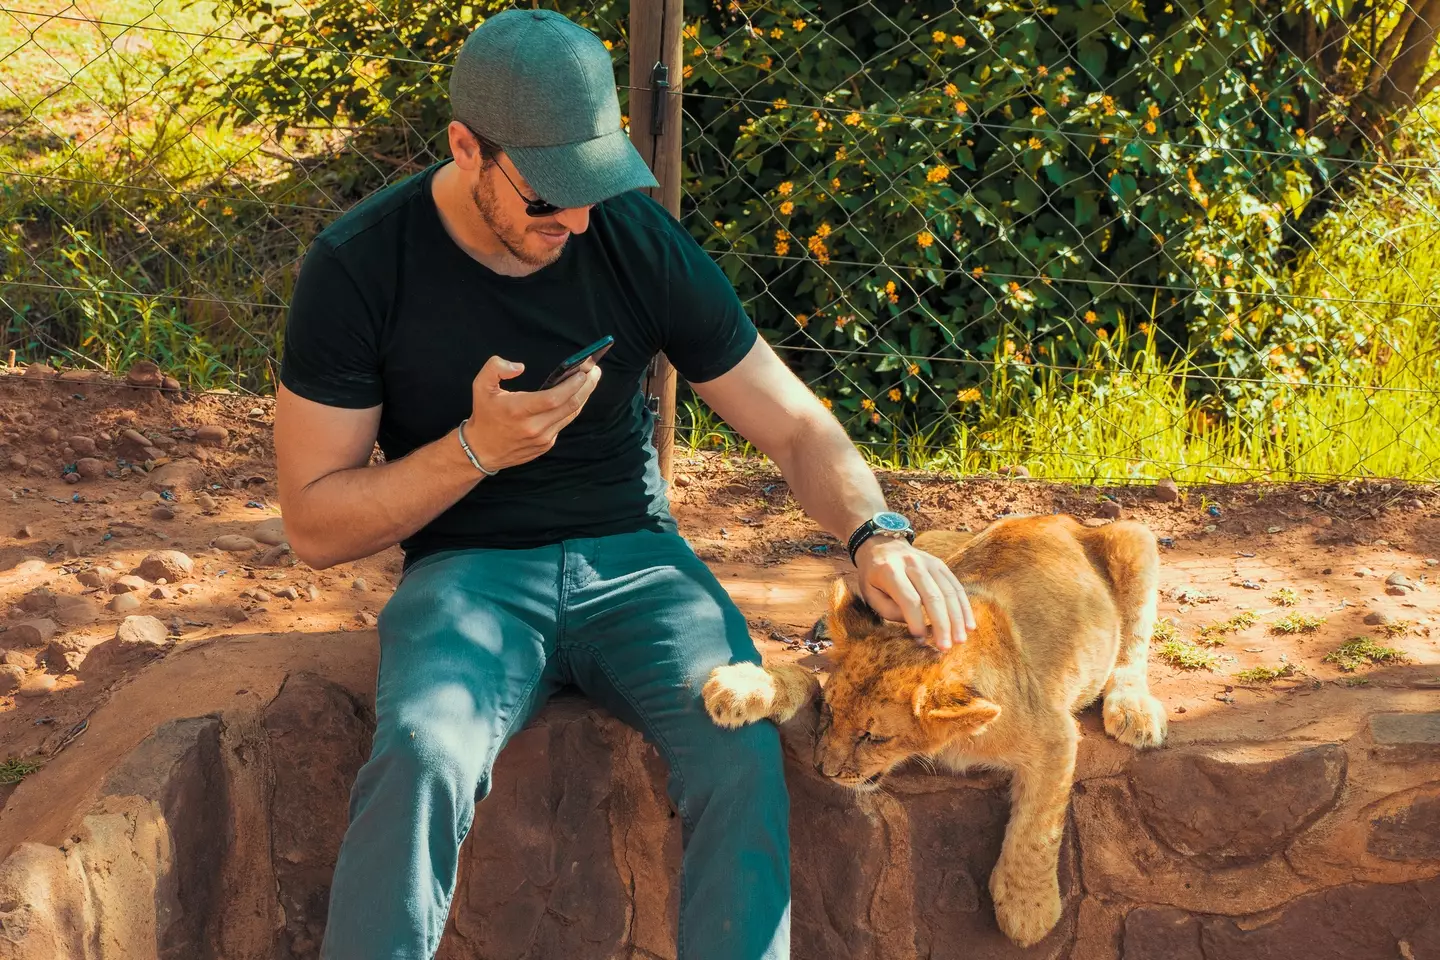 Lion cub petting is a popular tourist attraction in many countries. (aroundtheworld.photography/Getty Stock)